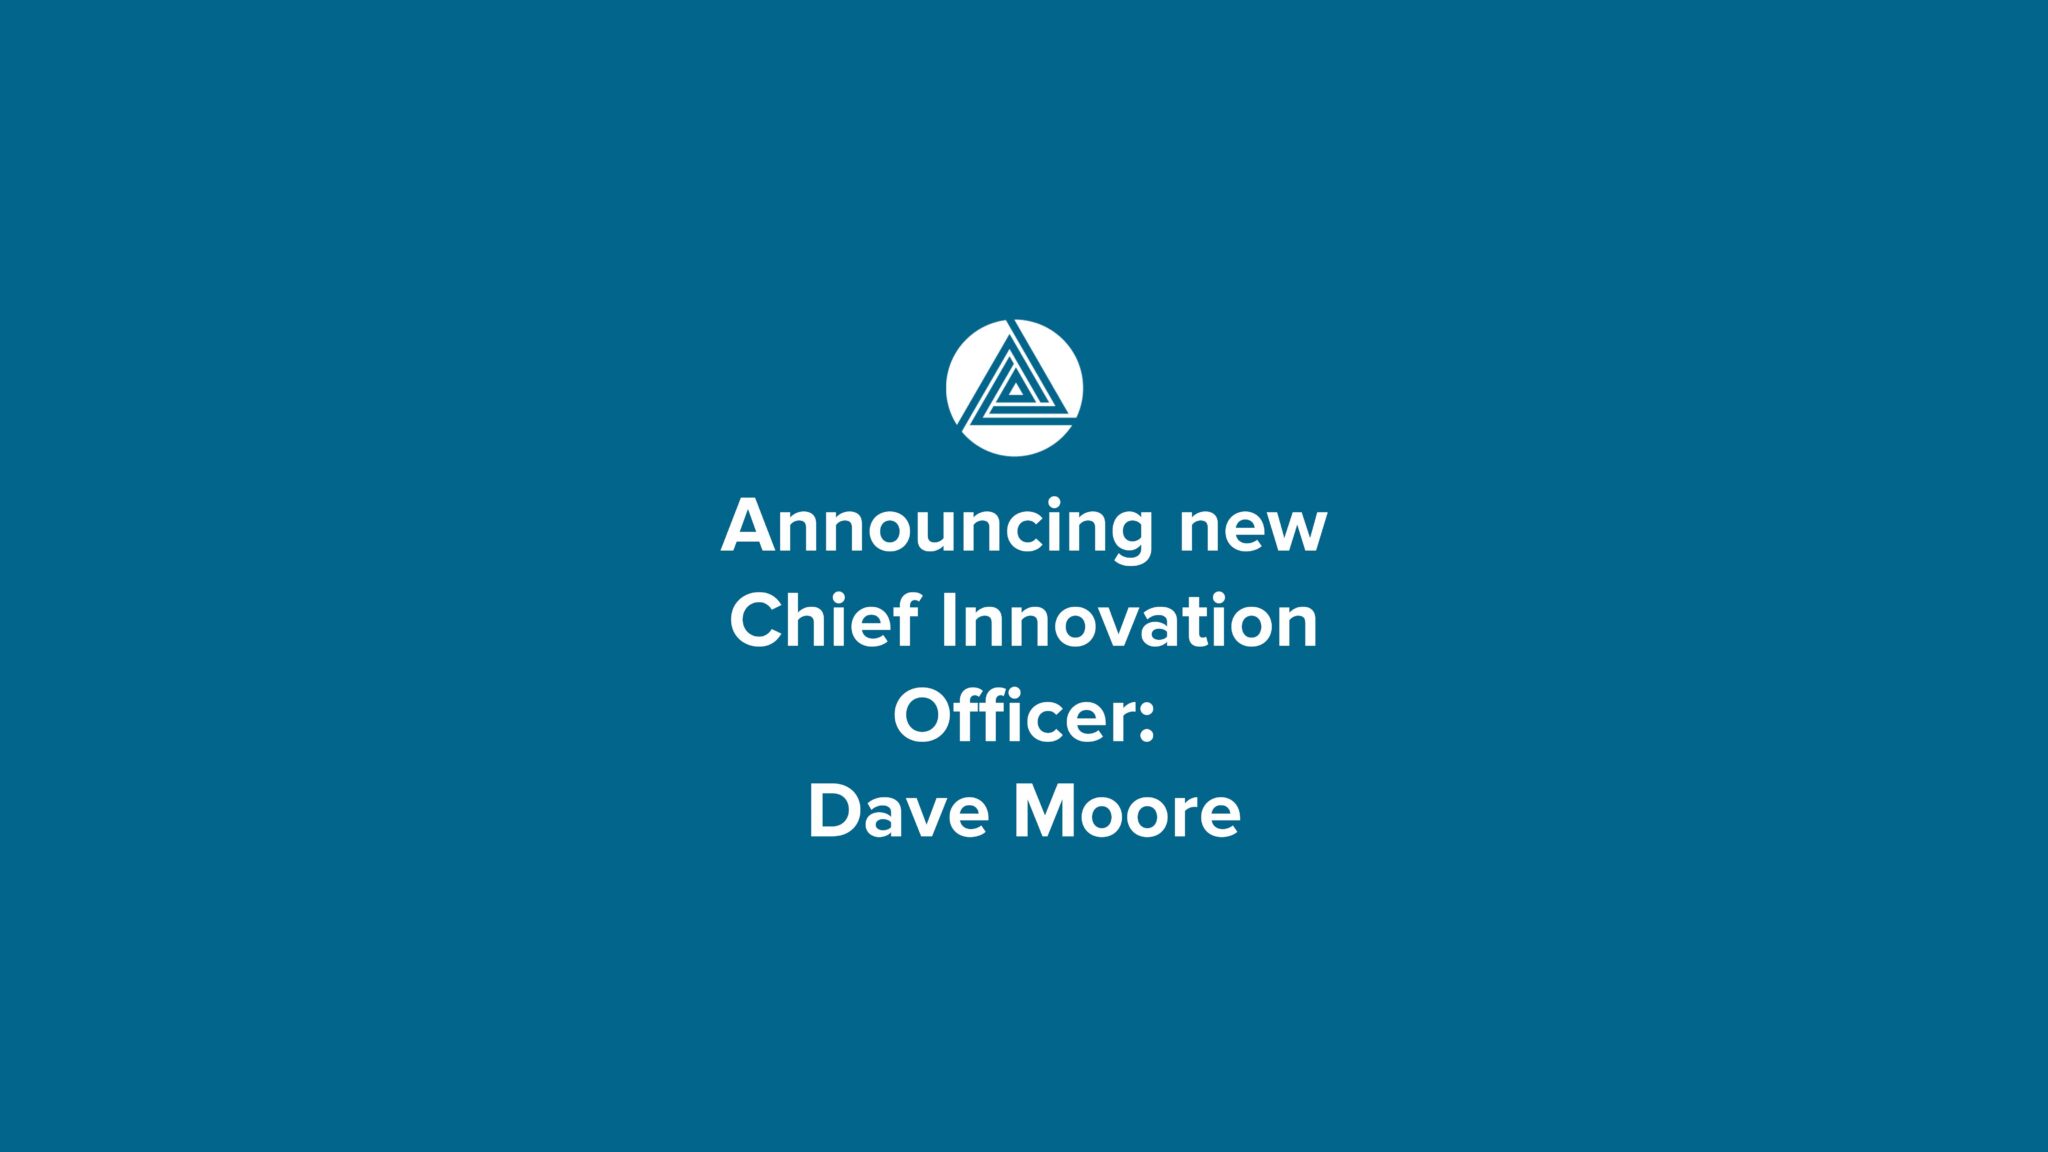 Growth Acceleration Partners Hires Chief Innovation Officer, Diversifies Services Strategy